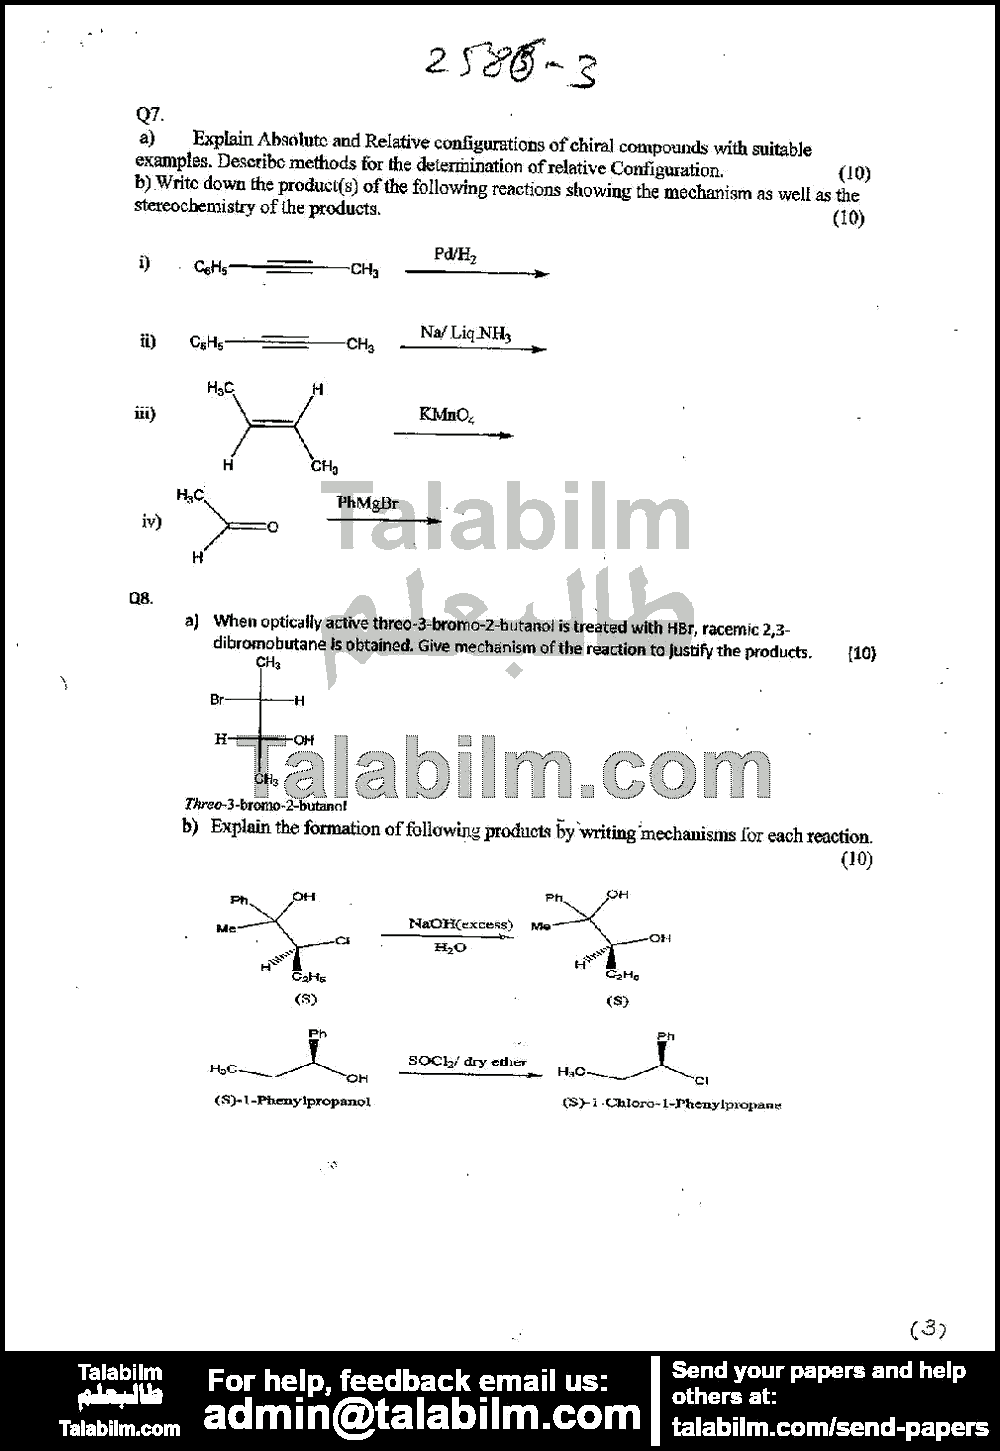 Stereochemistry of Organic Compounds 2586 past paper for Spring 2015 Page No. 3